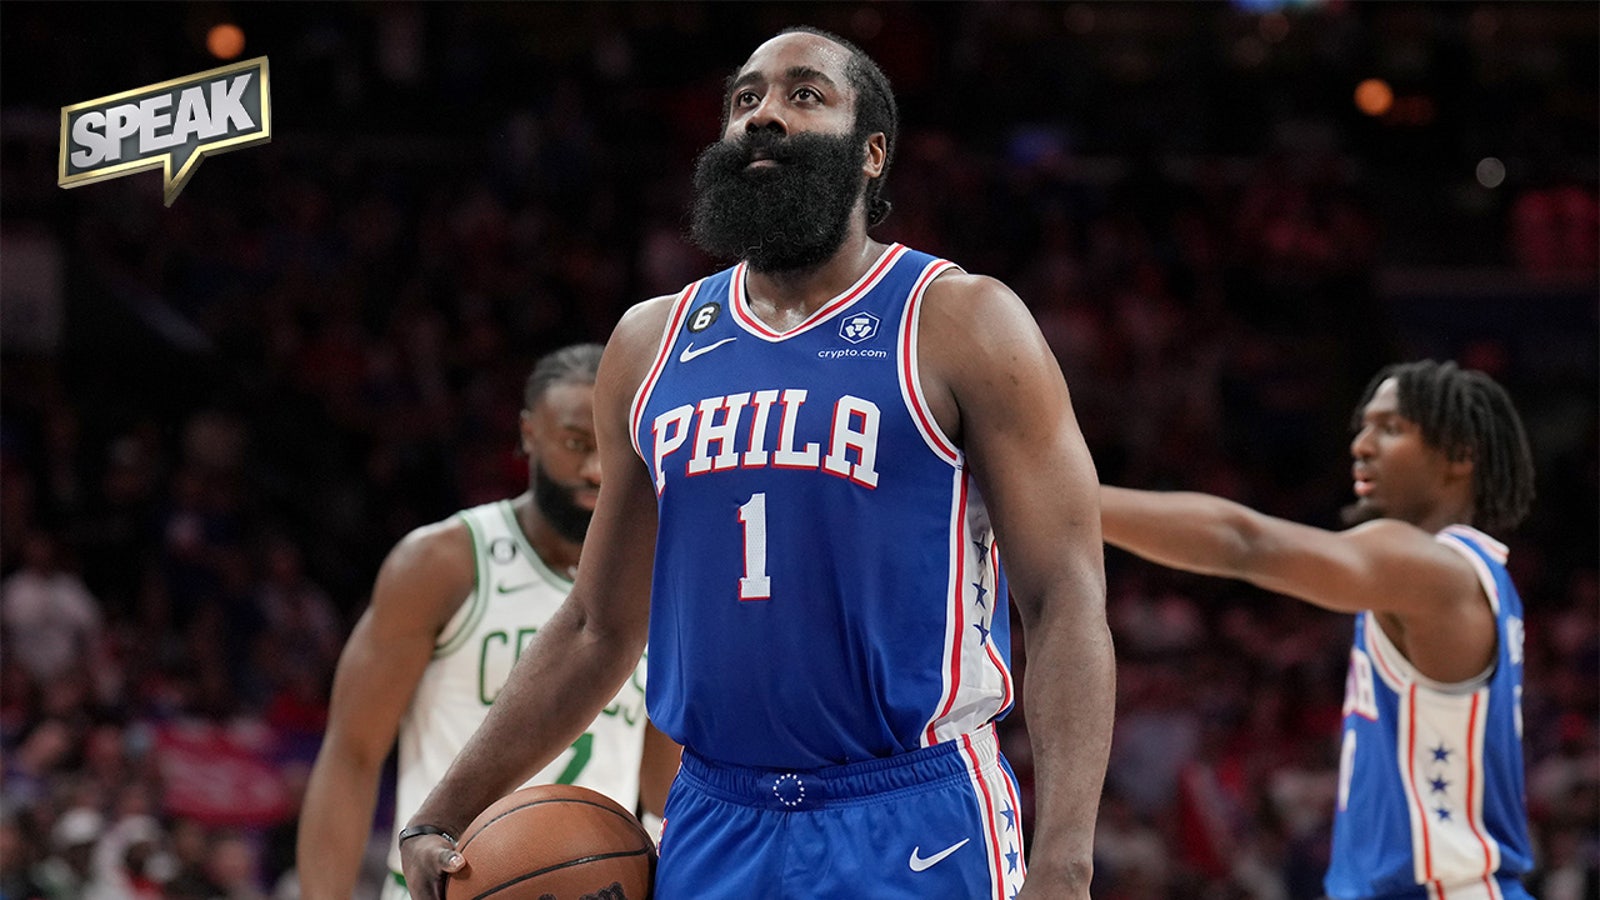 James Harden settles on his $35.6M deal, Clippers and Knicks join trade talks |  SPEAK